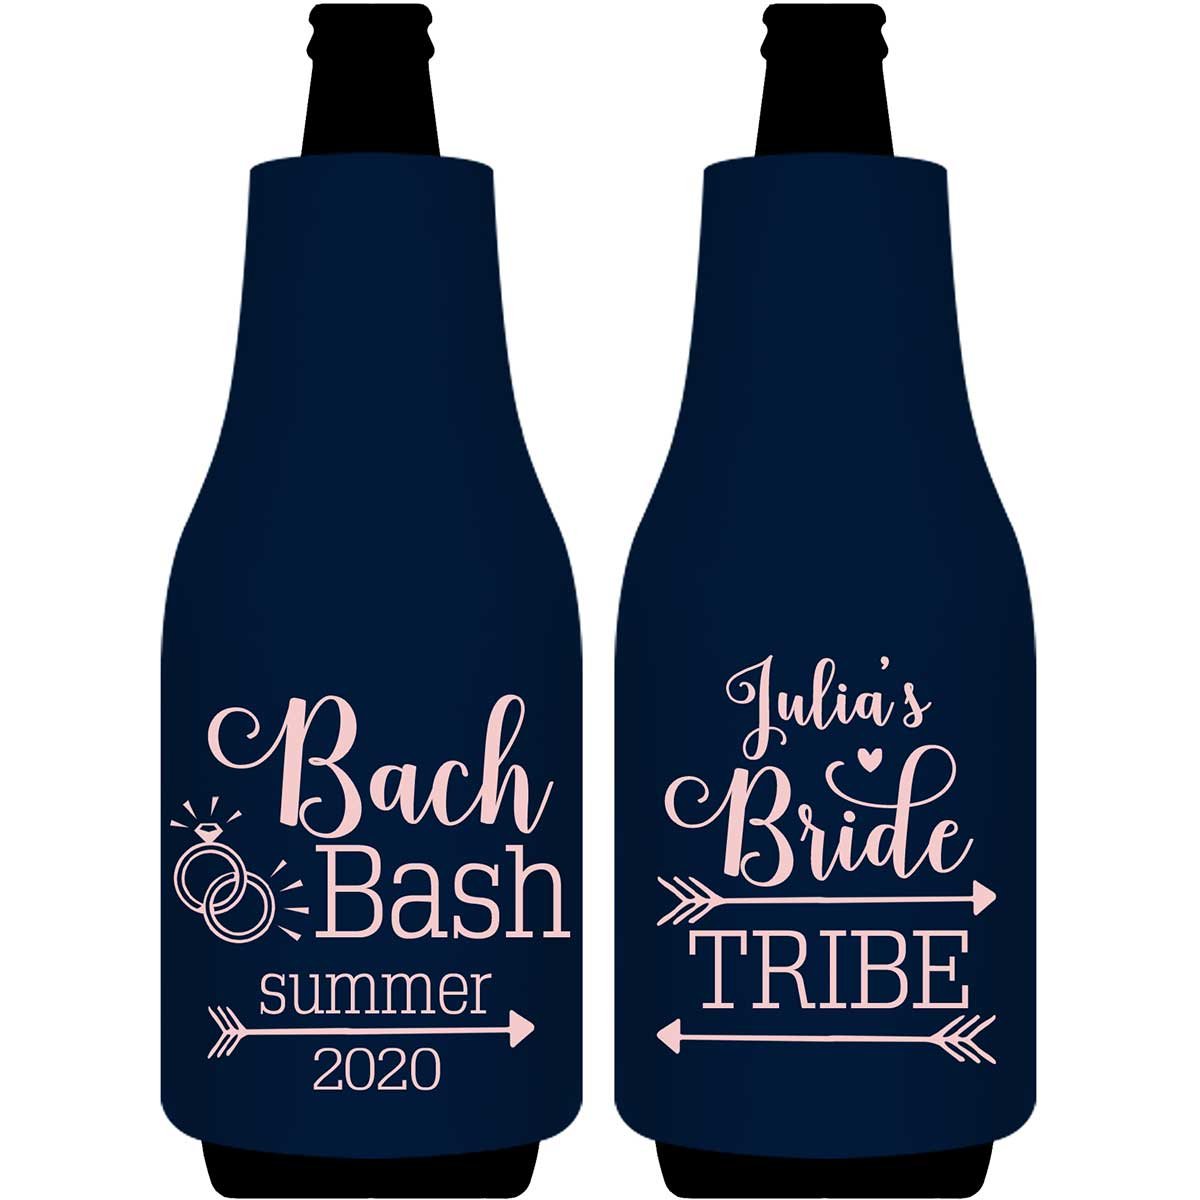 Bride Tribe Bachelorette Bash 1A Foldable Bottle Sleeve Koozies Wedding Gifts for Guests